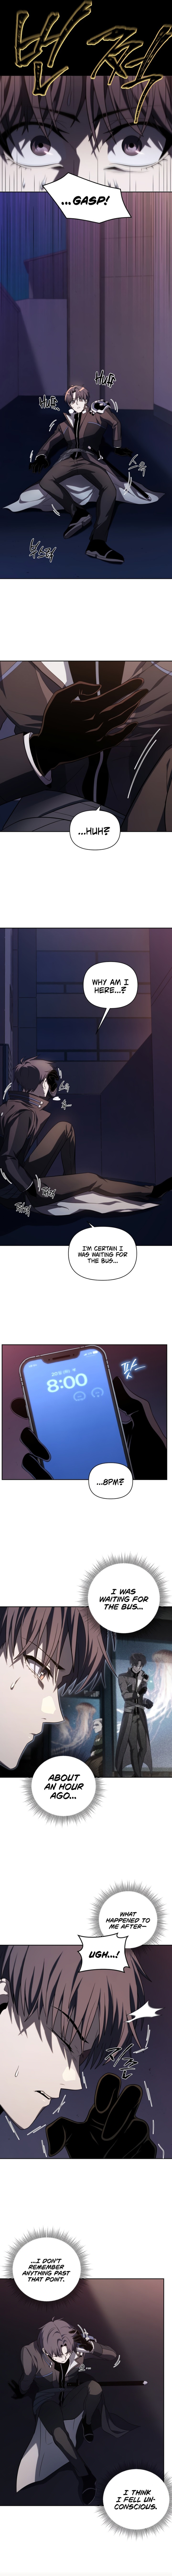 Player Who Returned 10,000 Years Later - Chapter 36 Page 13